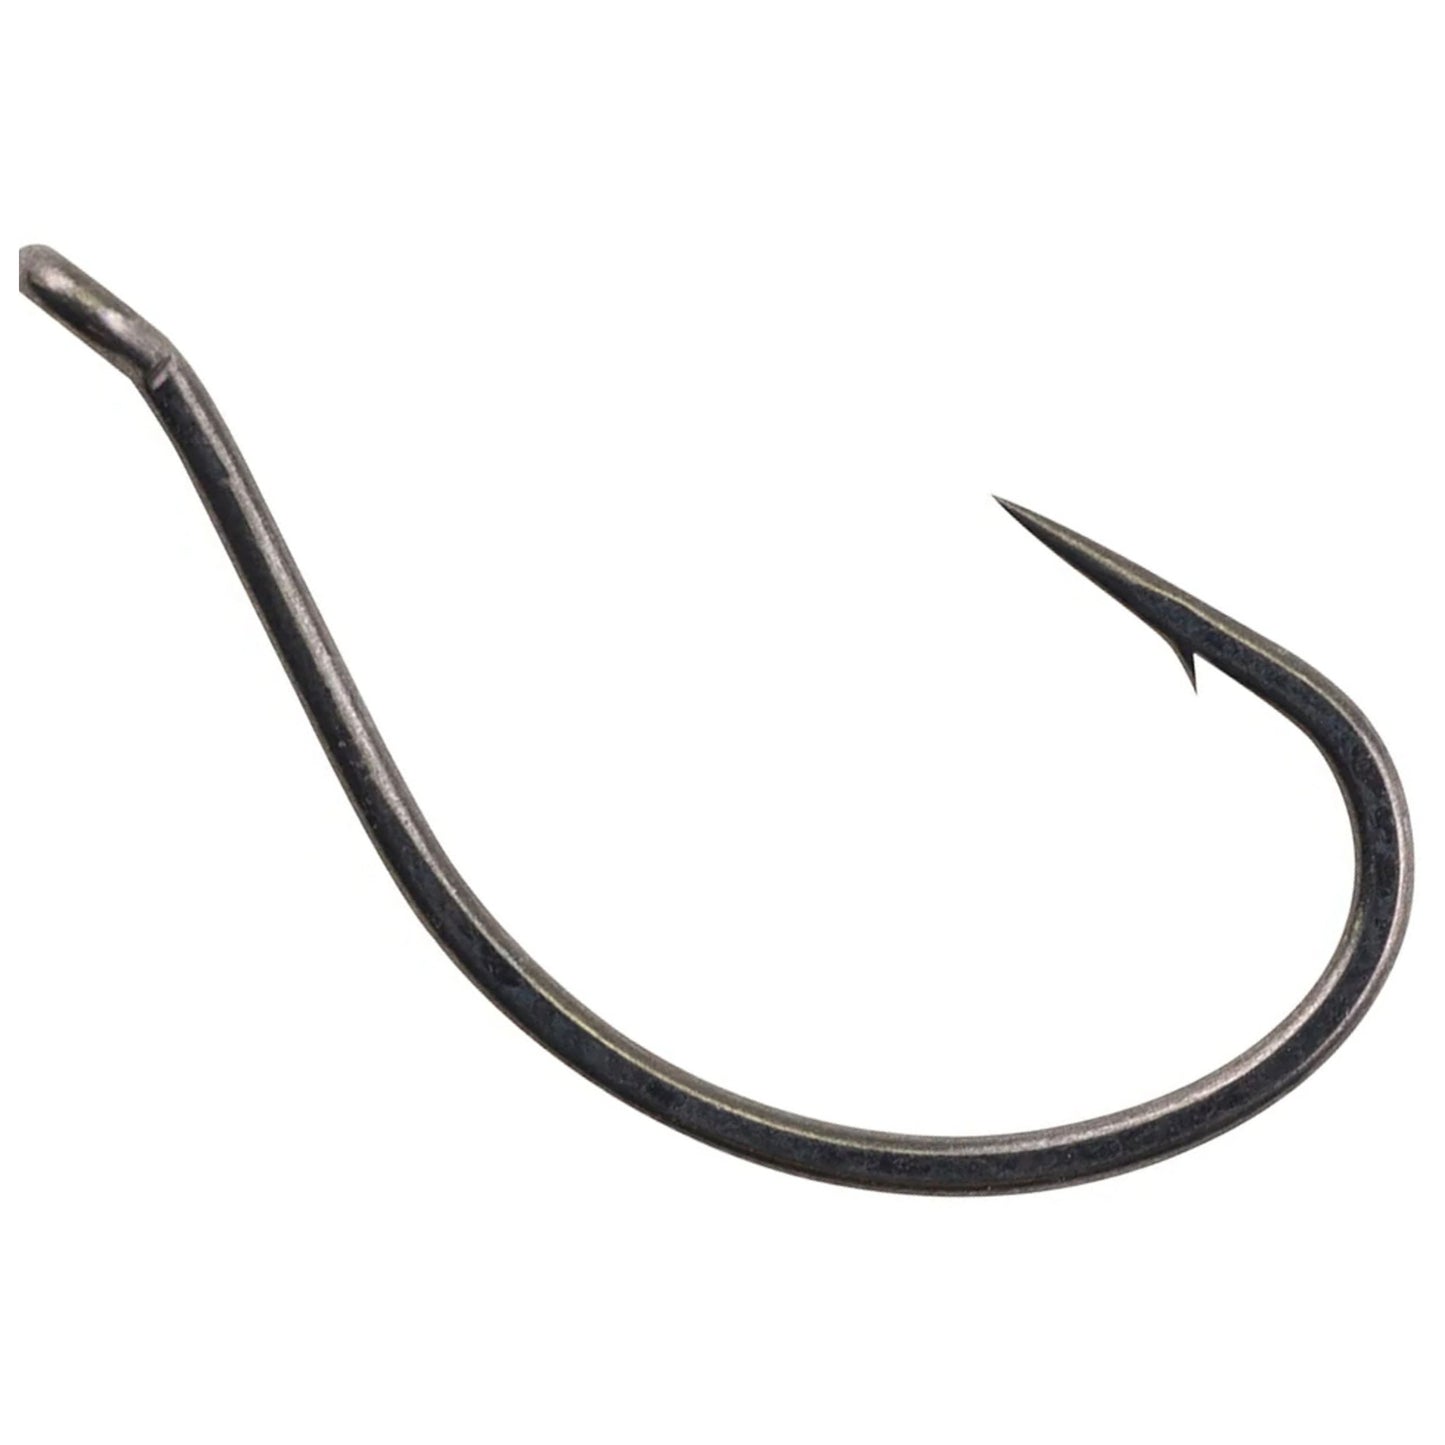 Reaction Tackle Dropshot Hooks- Pack of 50- EWG Design- Perfect for Dropshotting